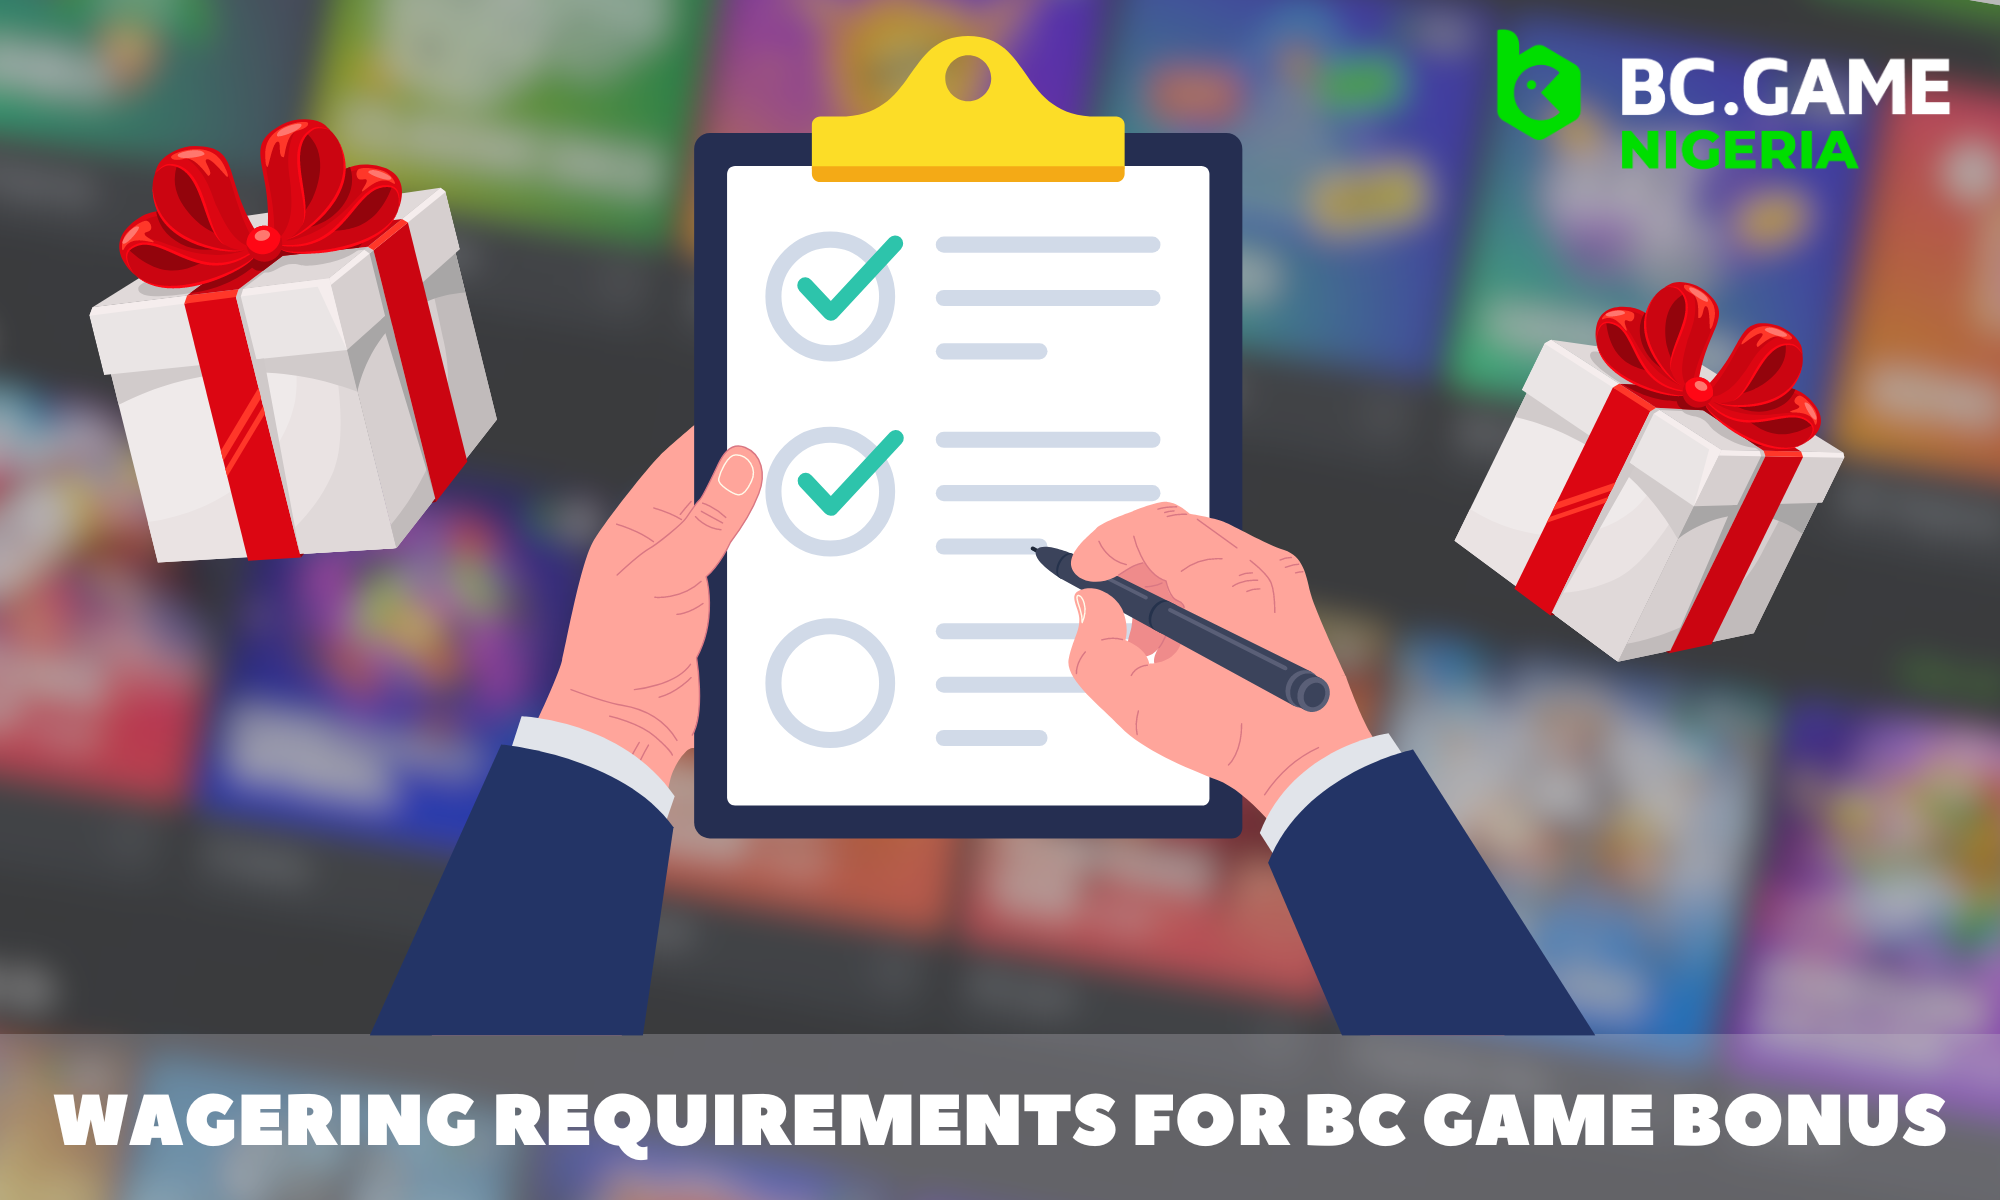 List of basic requirements for wagering BC Game